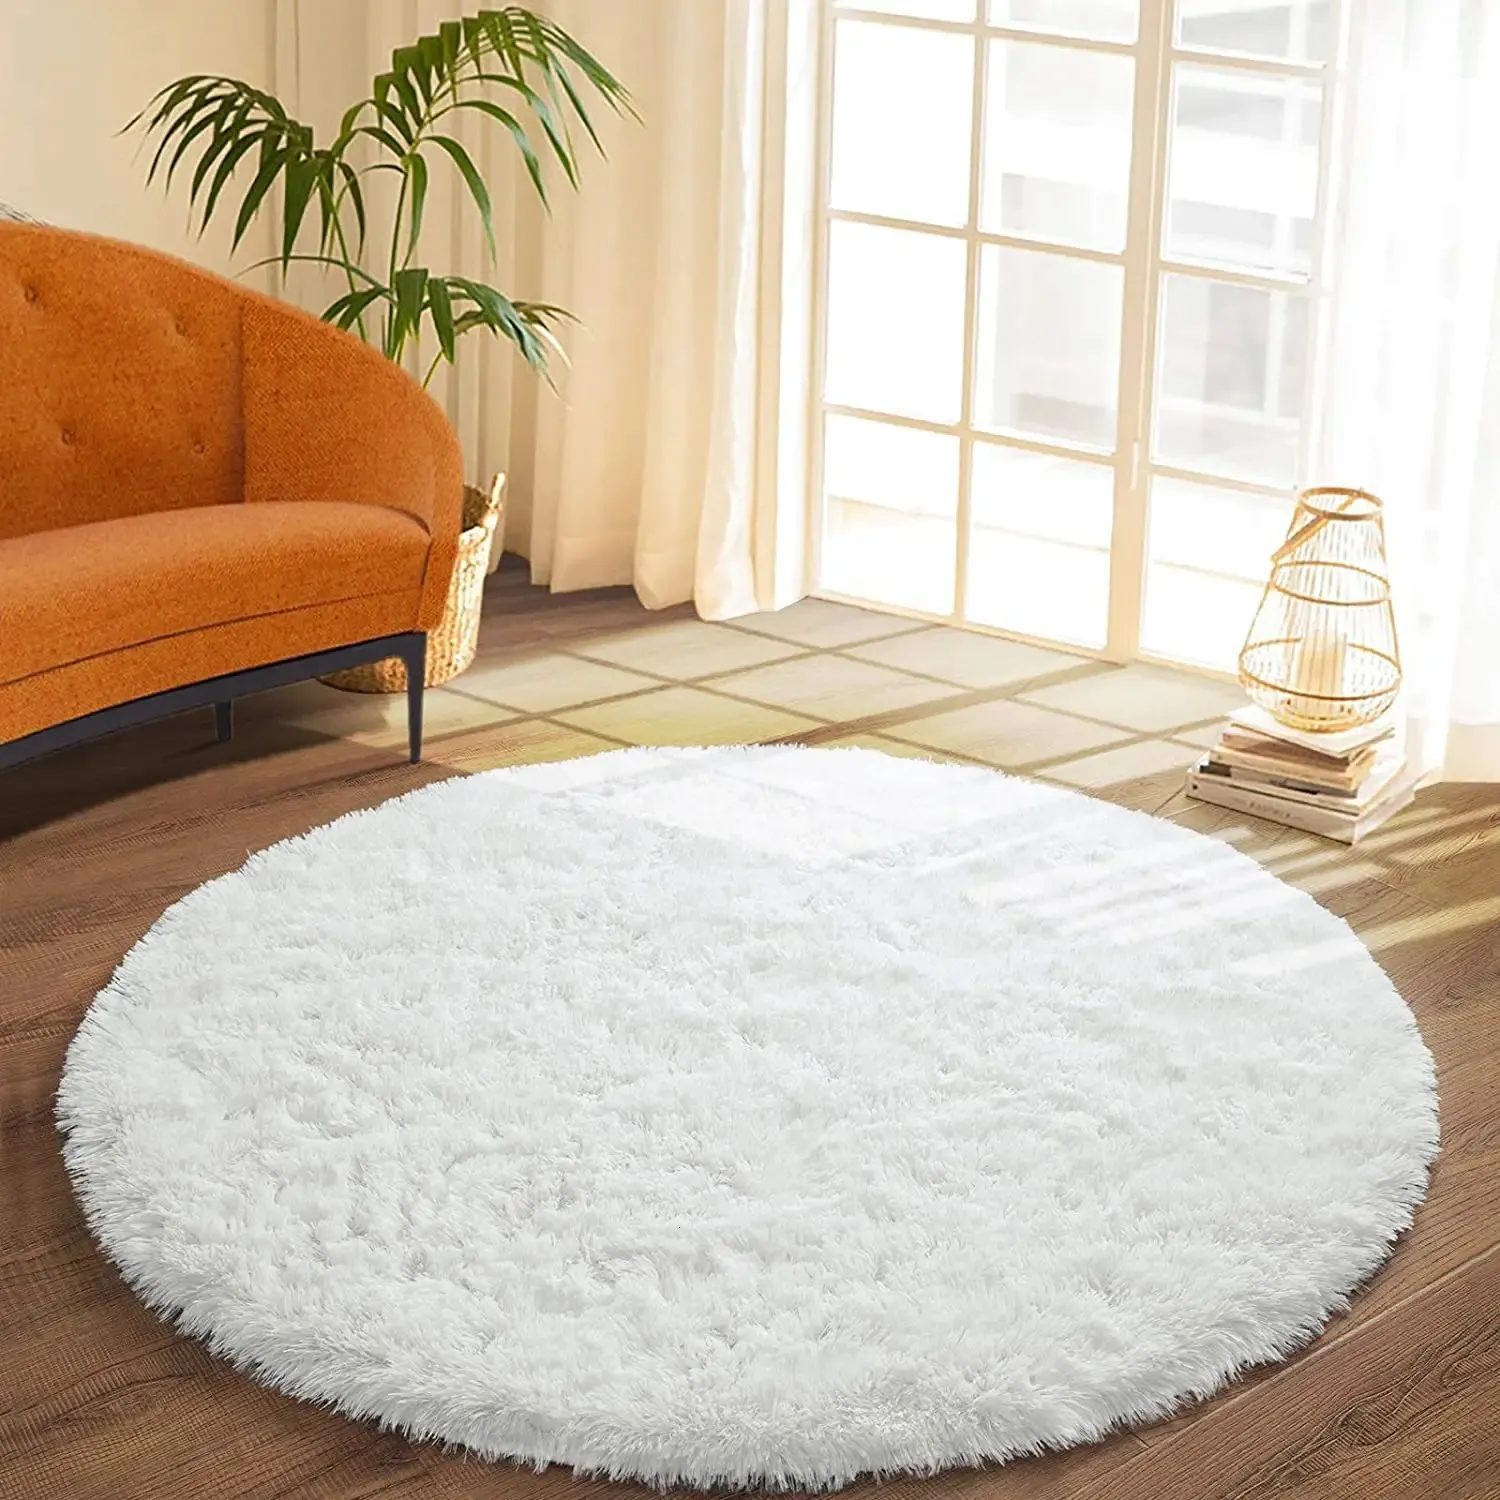 Carpets LOCHAS Round plush carpet Large Area Rug carpets for living room rugs for Bedroom baby Kid room decor mats outdoor camping plaid 231216